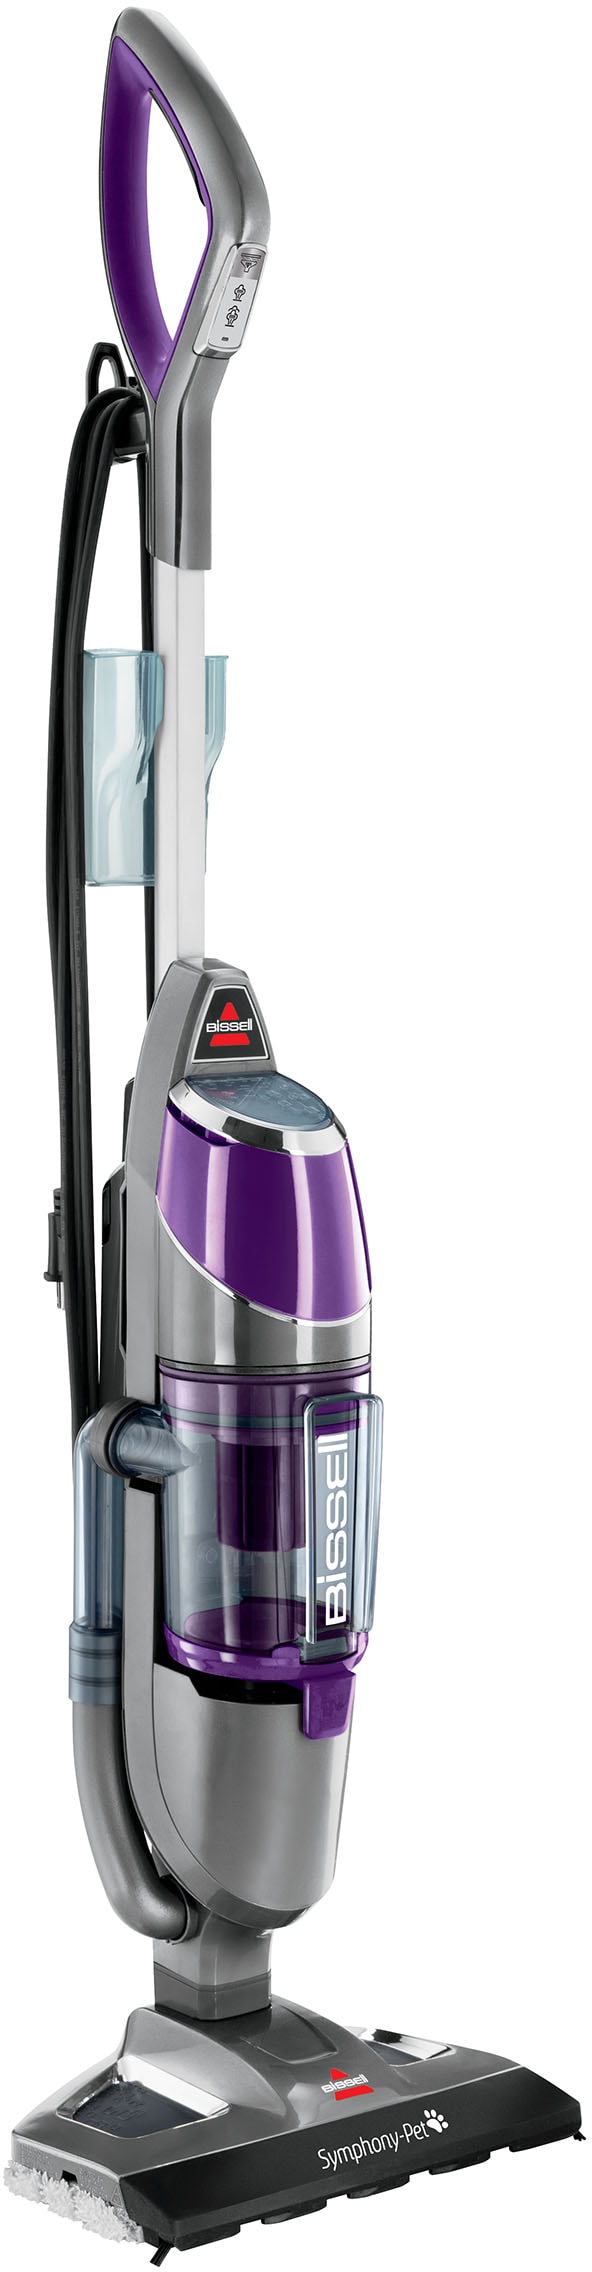 BISSELL - Symphony Pet All-in-One Vacuum and Steam Mop - Grey and Purple_1